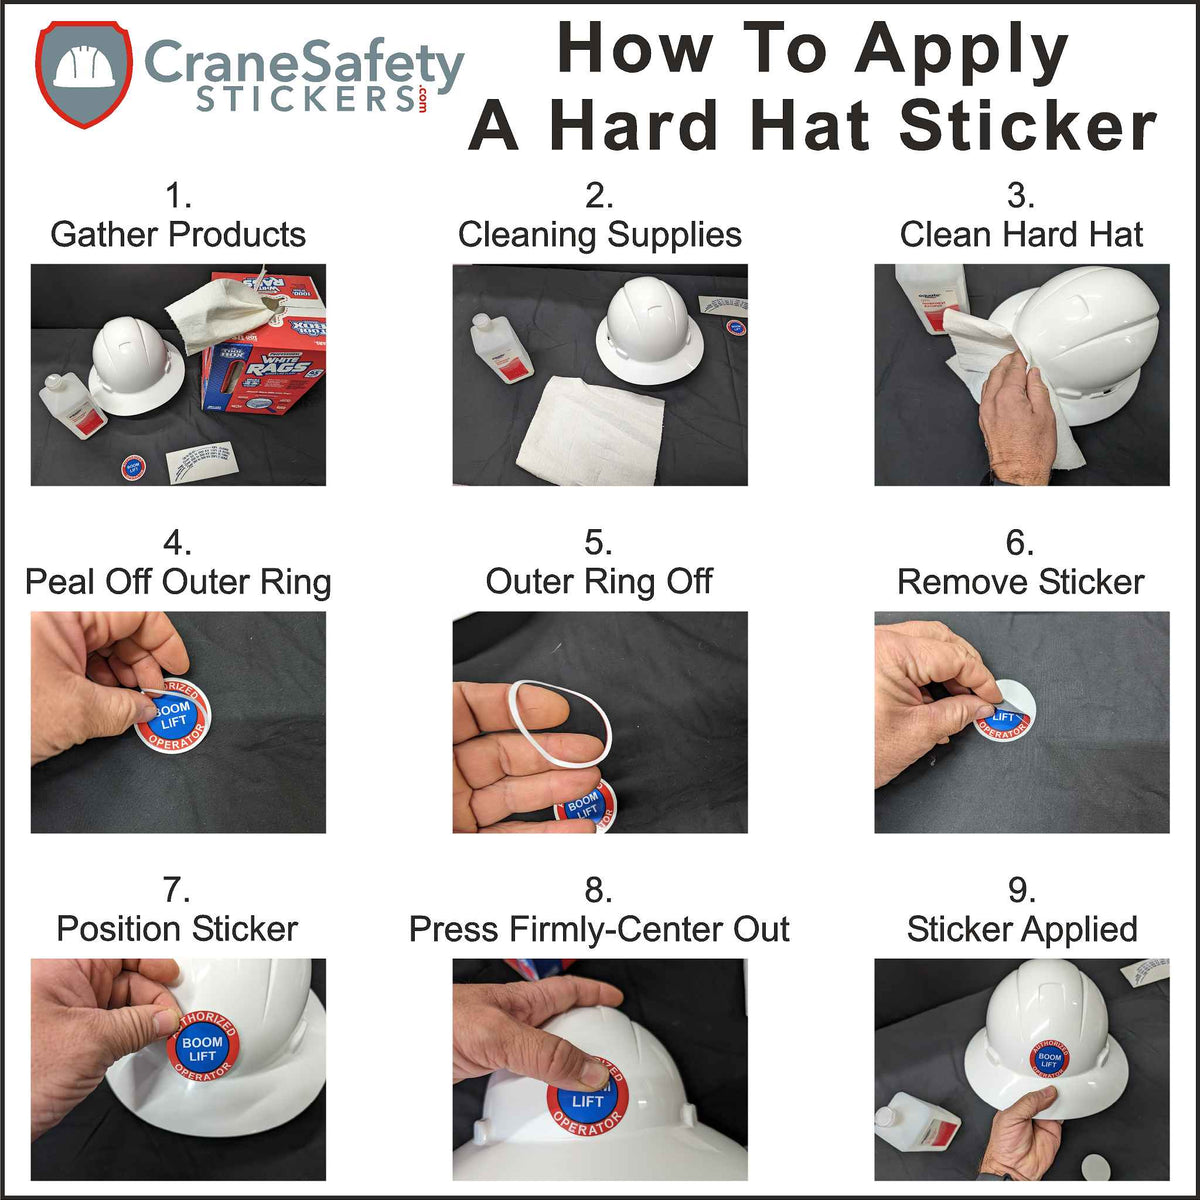 How to apply our Safe Worker Hard Hat Sticker onto a hard hat.